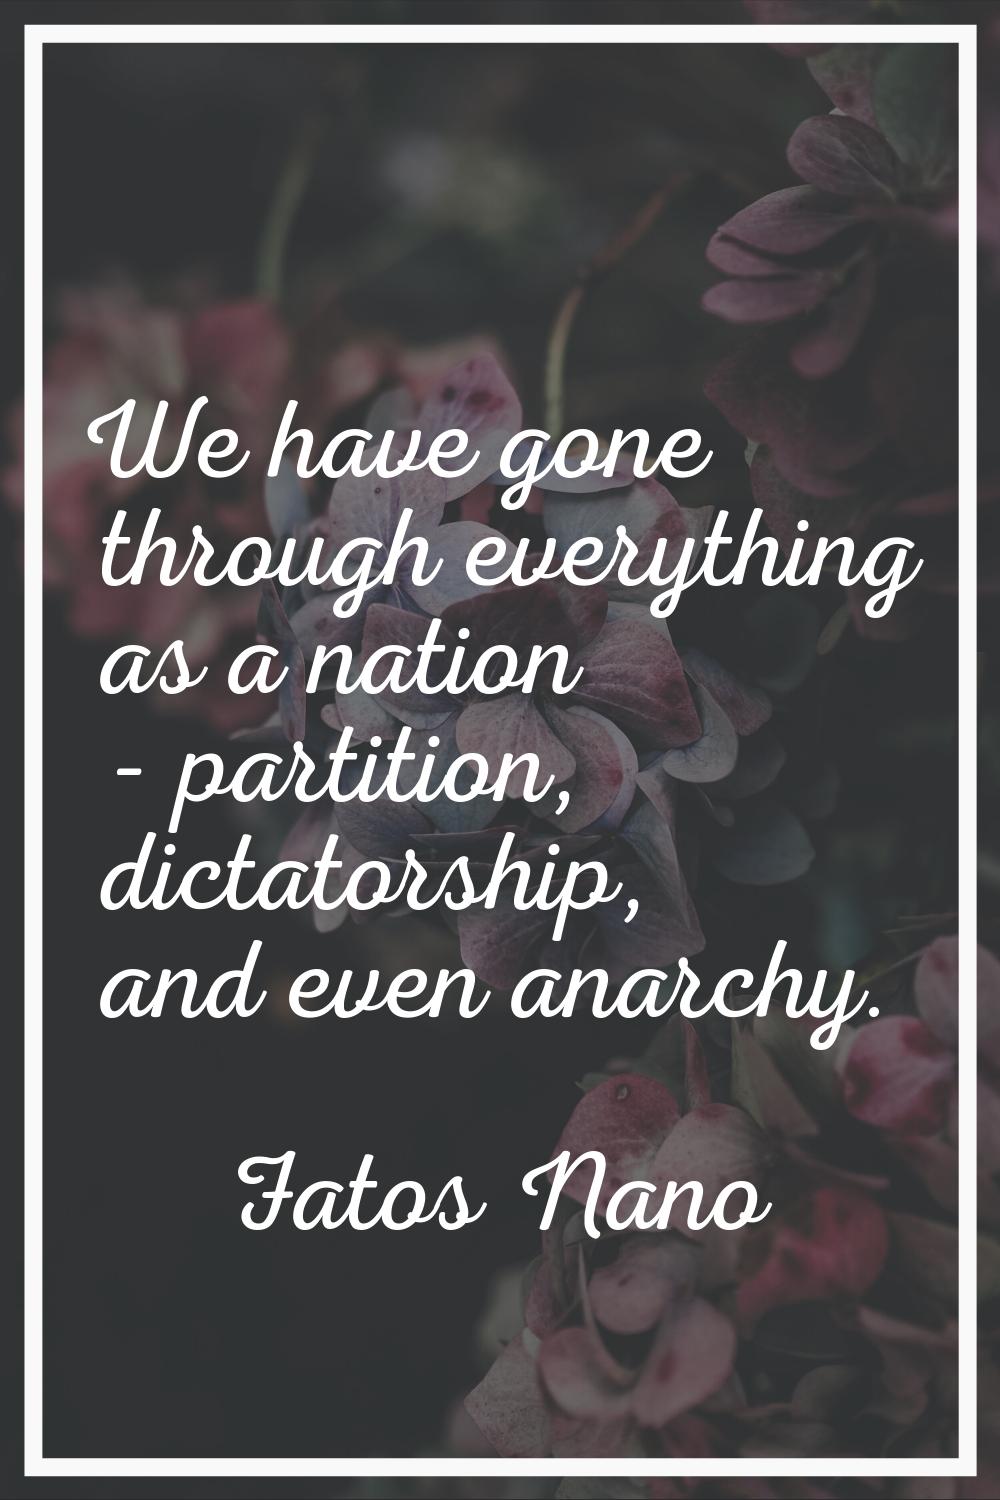 We have gone through everything as a nation - partition, dictatorship, and even anarchy.